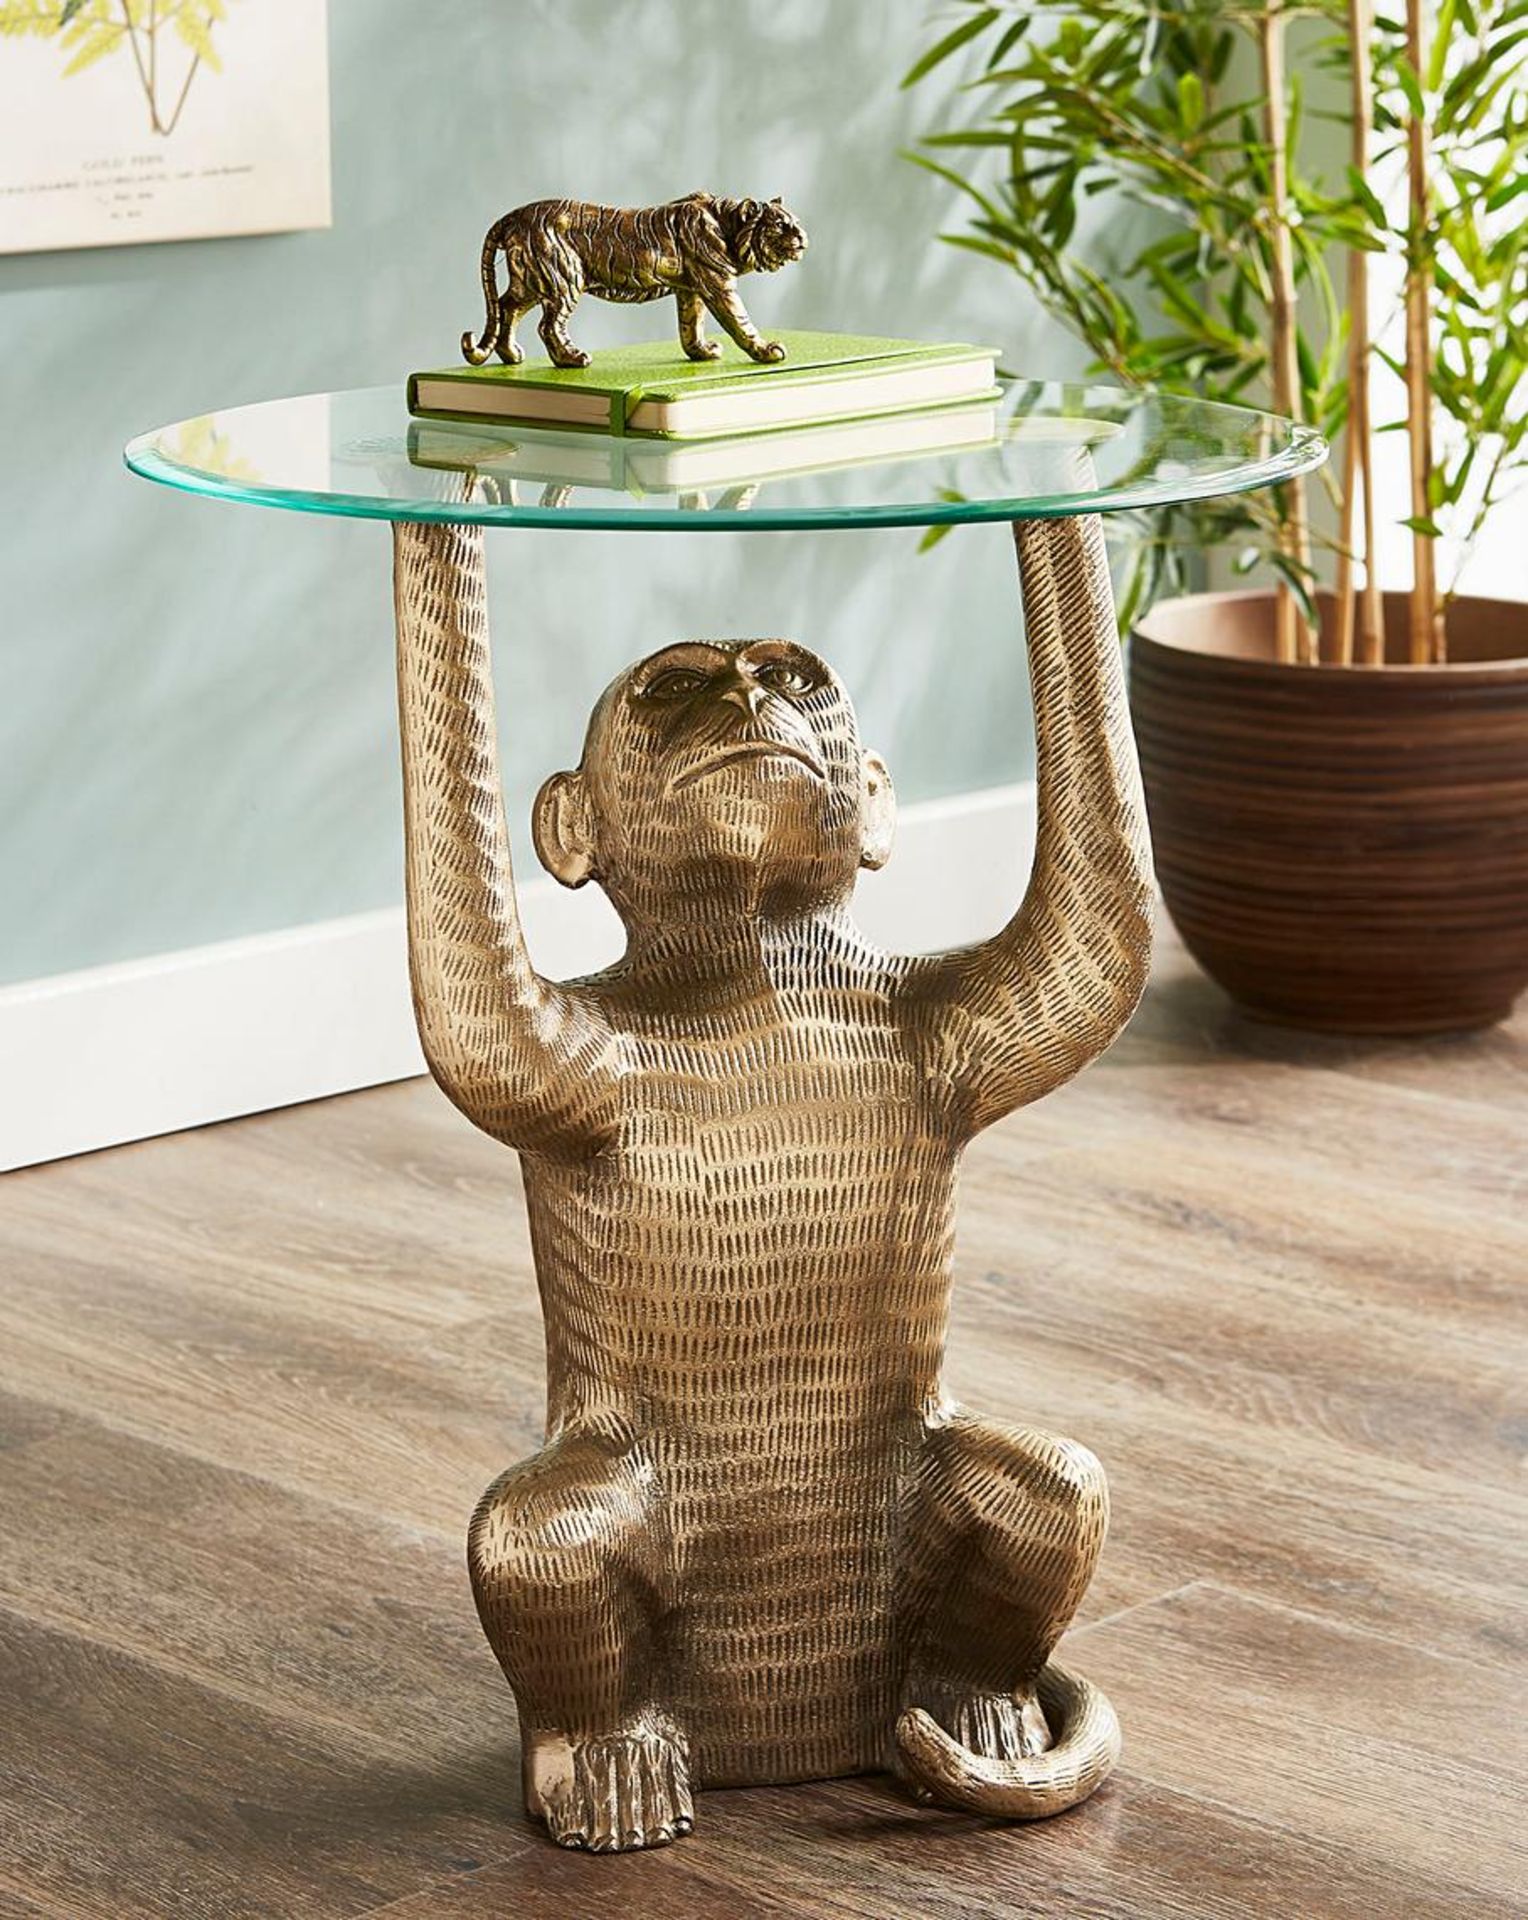 Monkey Side Table. RRP £149.99. - SR3.Add a safari chic vibe to your space with the quirky monkey